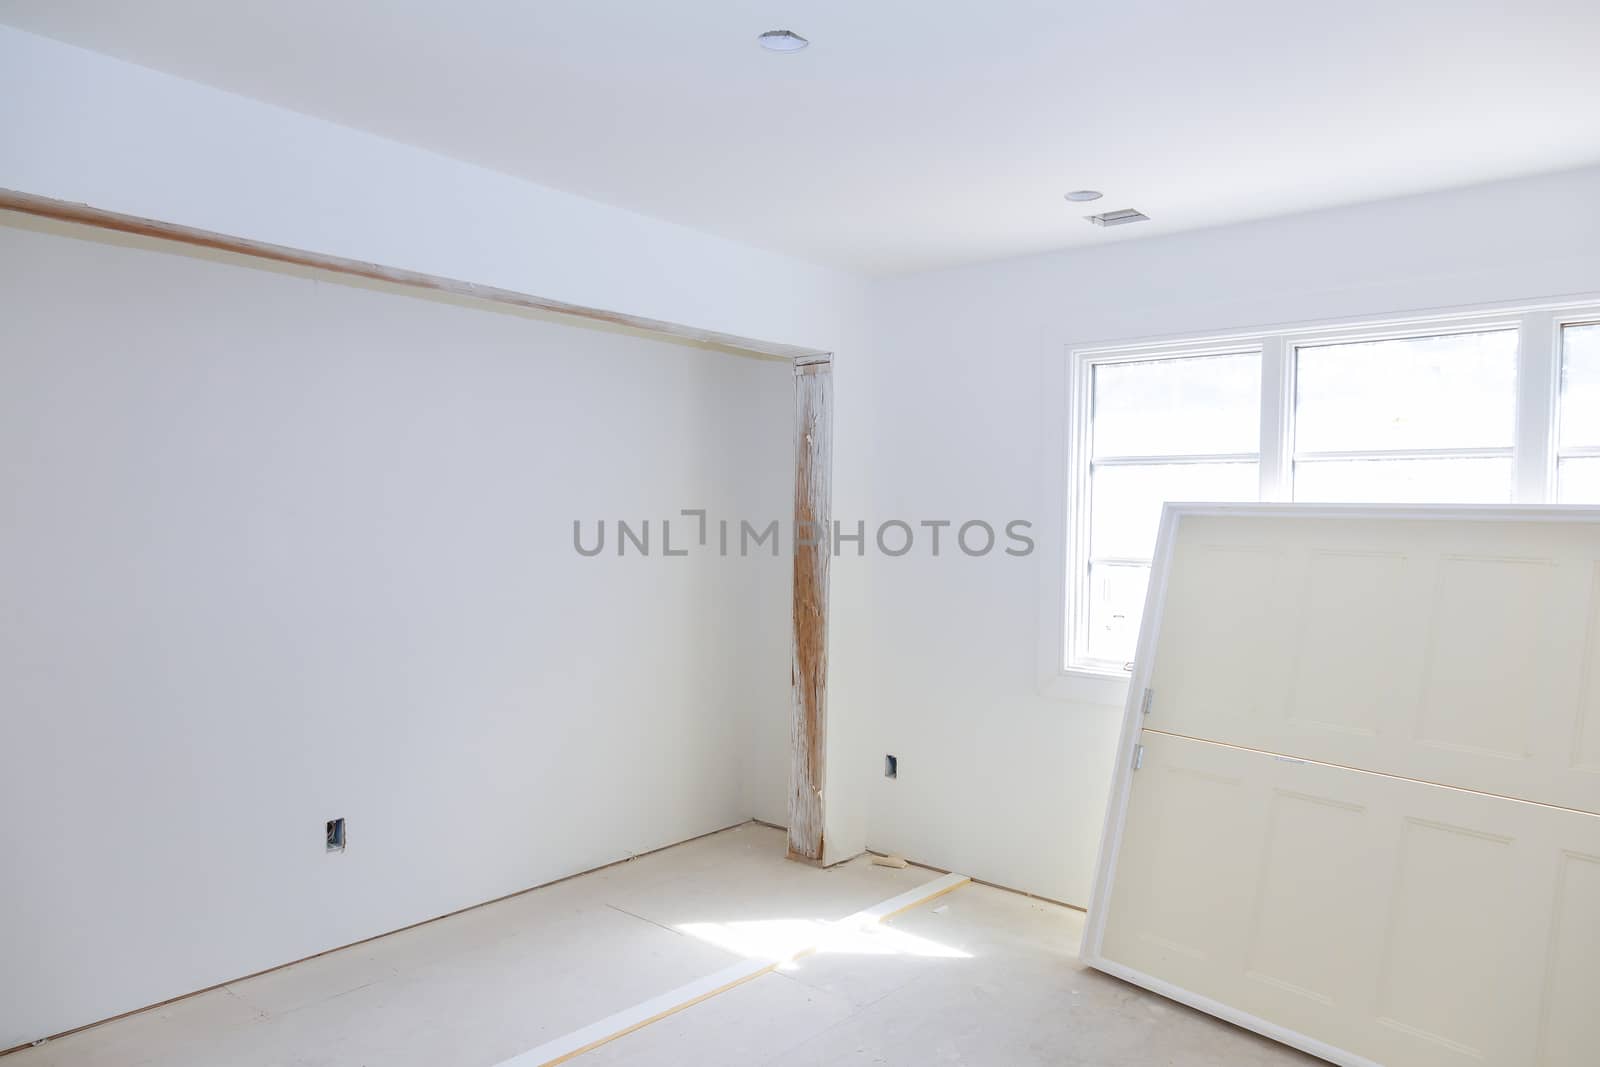 Waiting preparation interior doors for room remodeling installing material new home